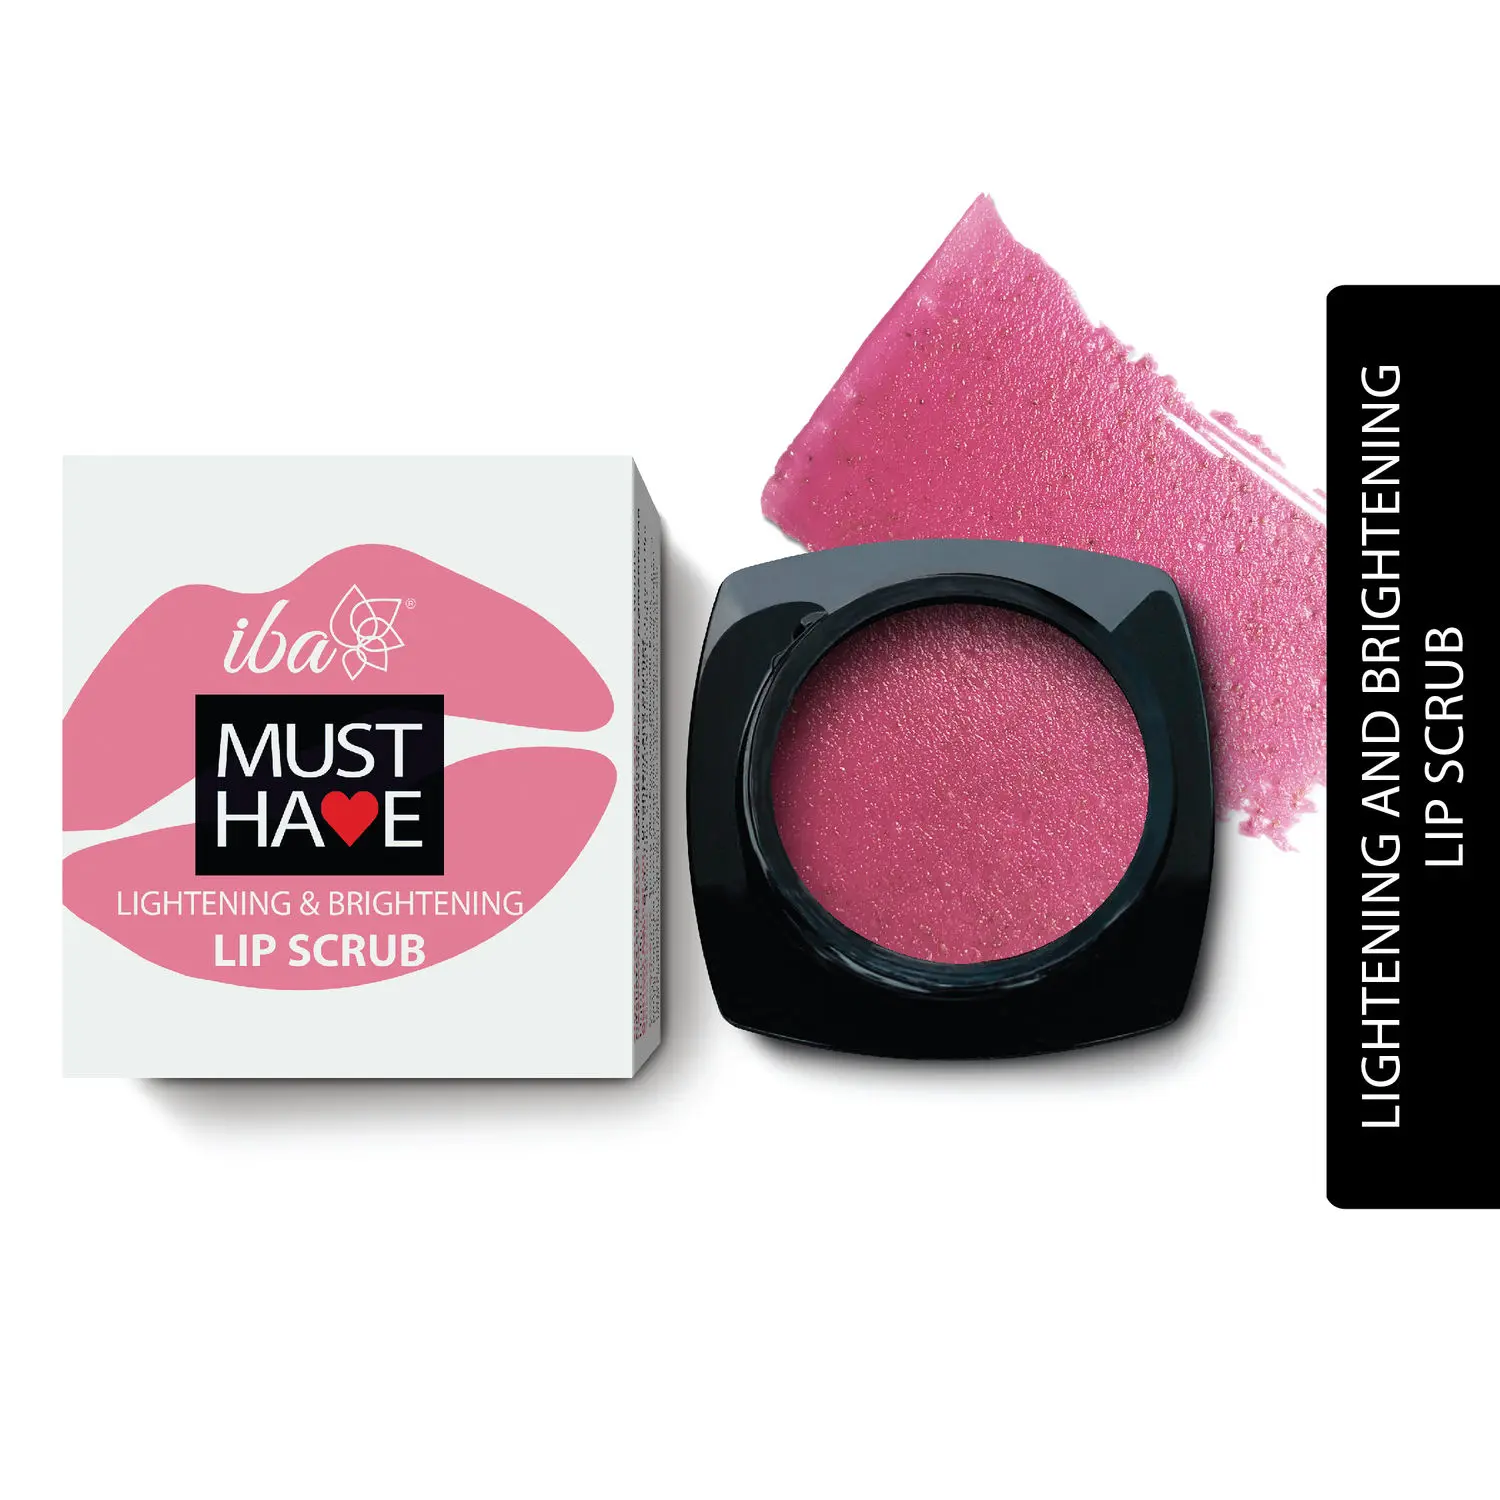 Iba Must Have Lightening & Brightening Lip Scrub for Dry Lips, Chapped & Smoker Lips | Enriched with Shea Butter & Rosehip Oil For Exfoliate Lips, Nourishes & Reduce Pigmentation | Vegan & Cruelty Free | Paraben & Sulfate Free, 8g